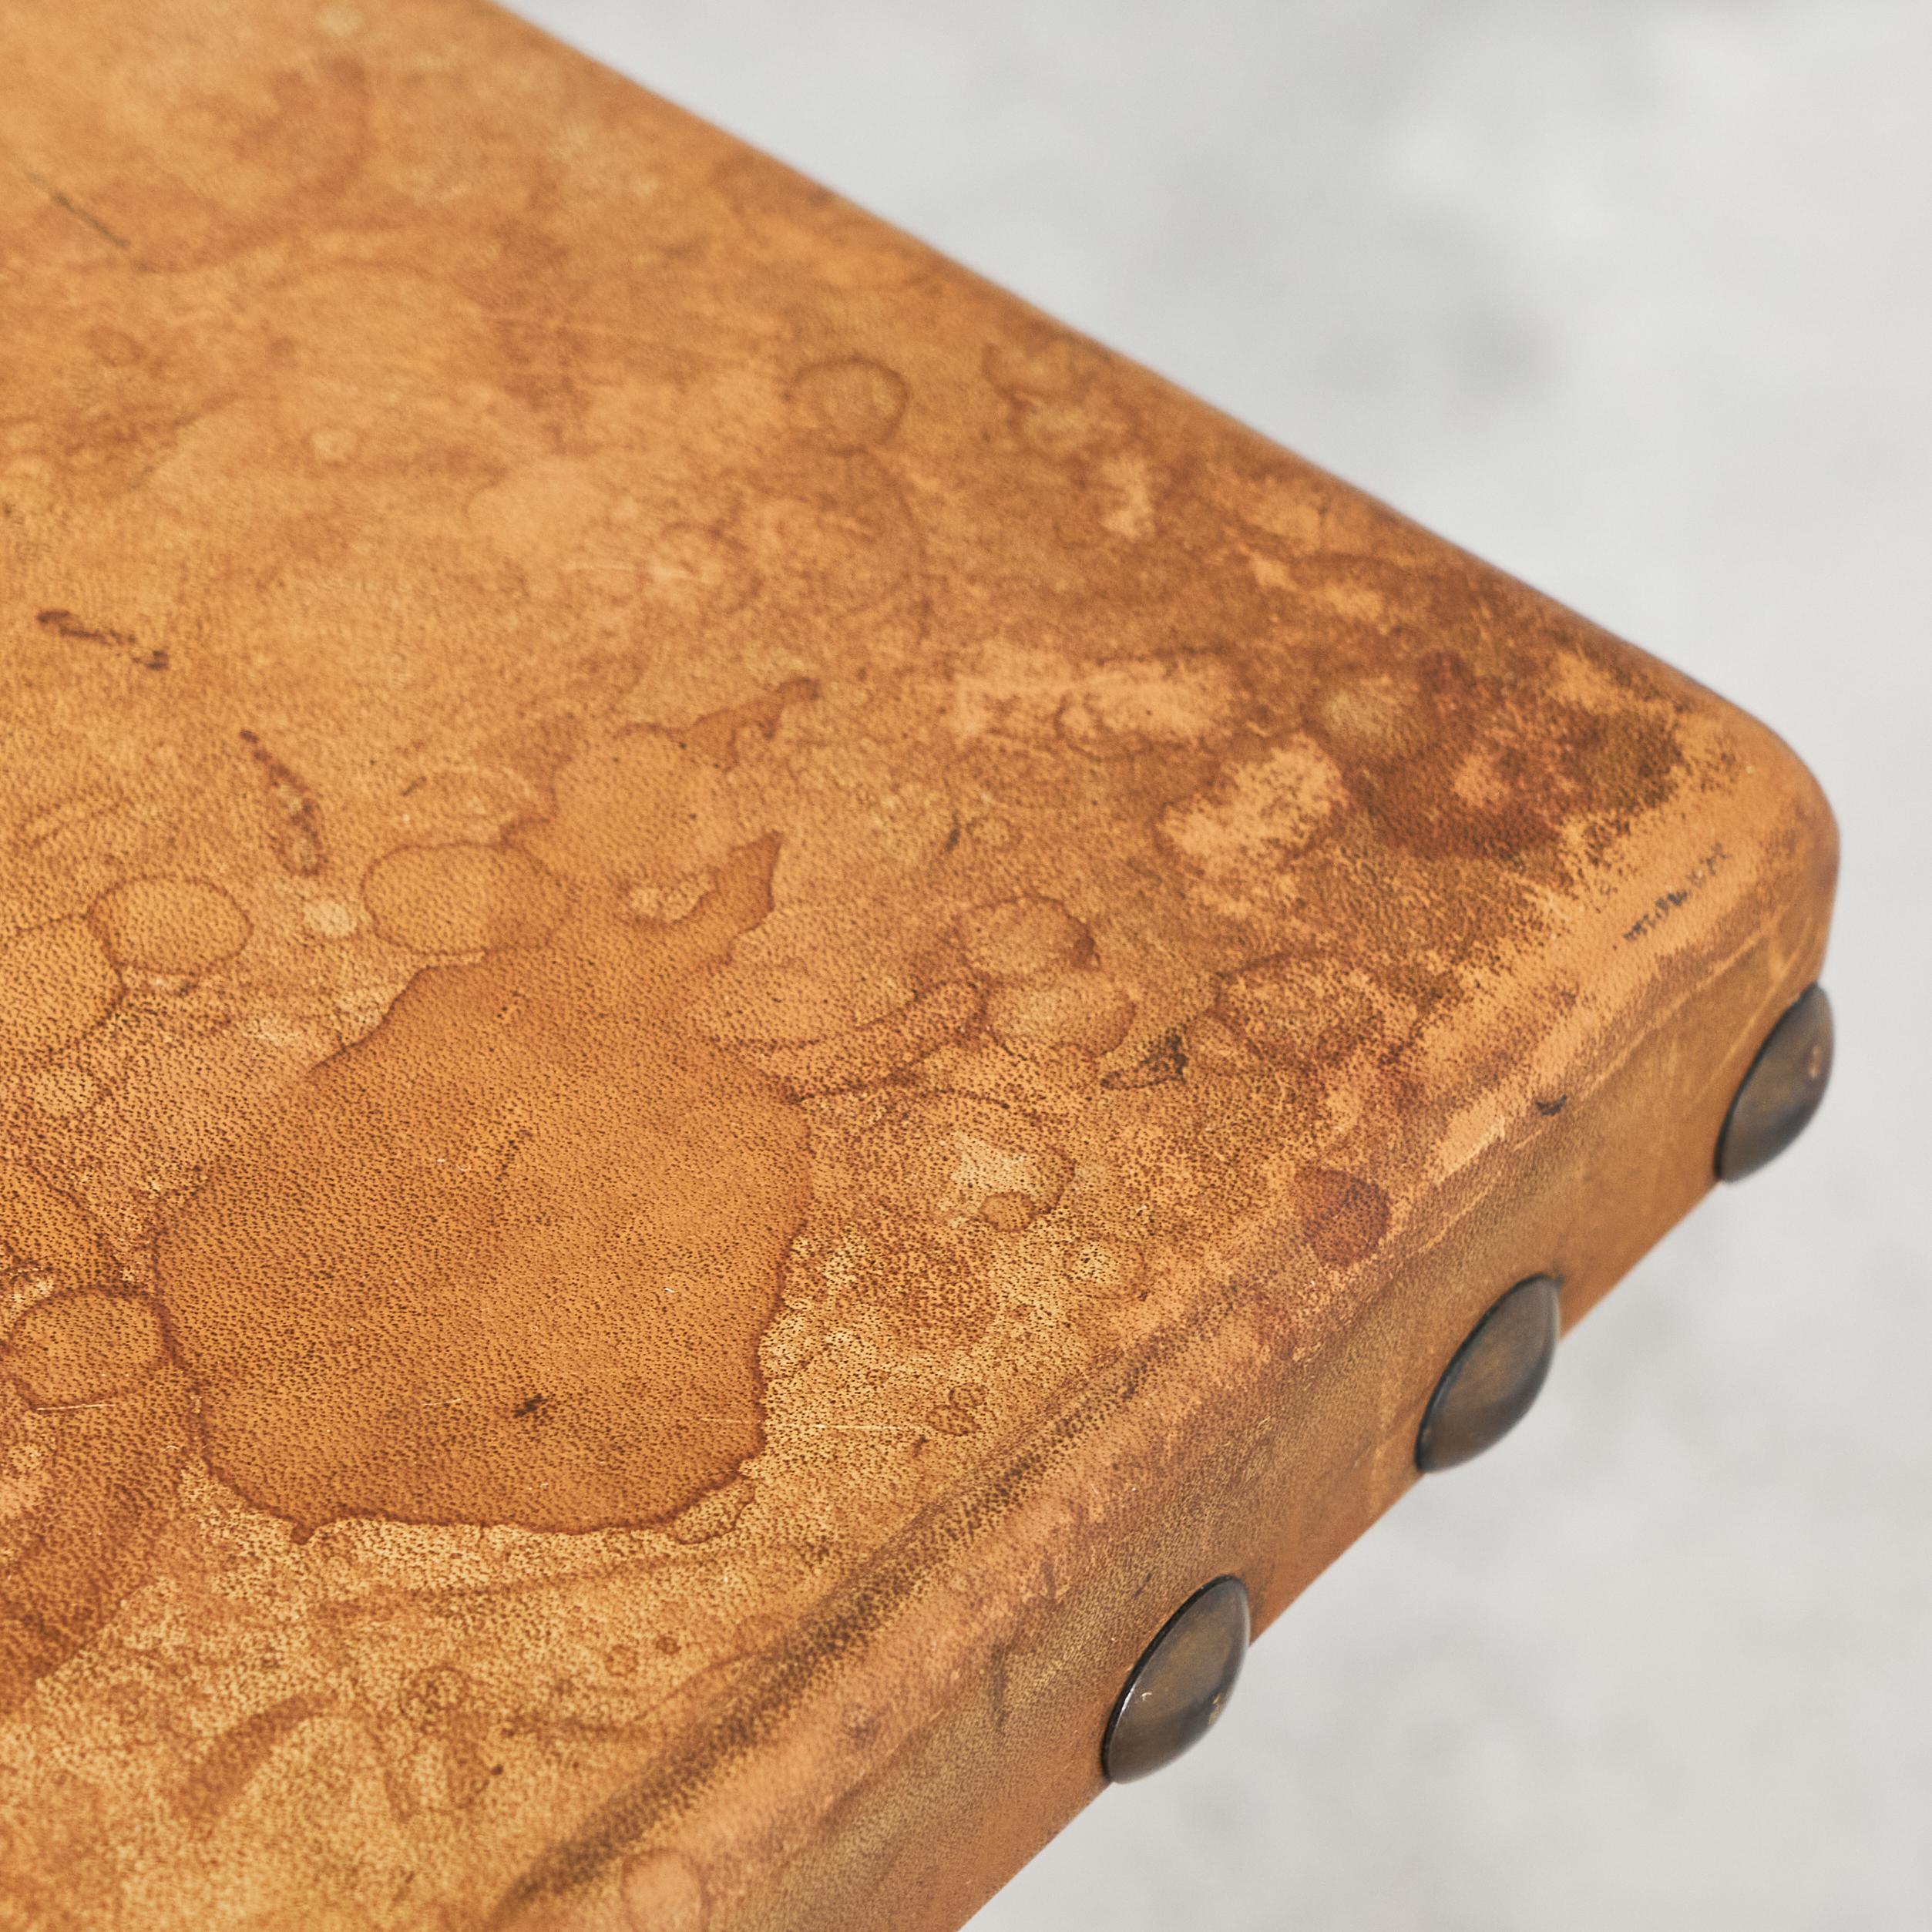 Spanish Brutalist Coffee Table in Solid Oak, Metal and Patinated Leather 1940s For Sale 10